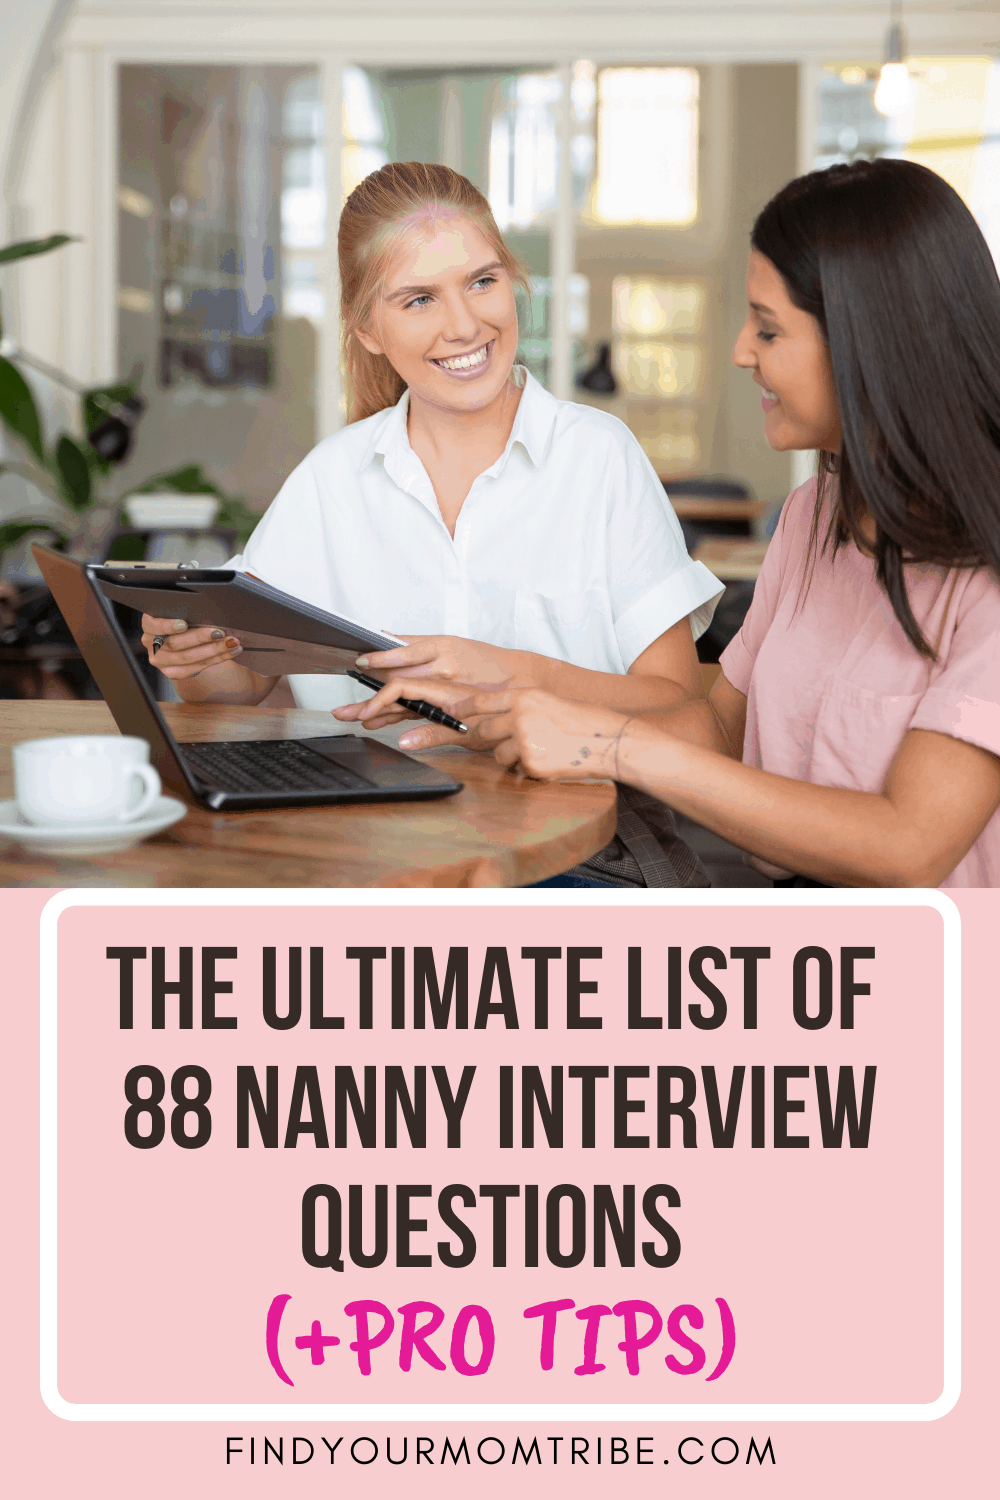 The Ultimate List Of 88 Nanny Interview Questions (+Pro Tips) Pinterest